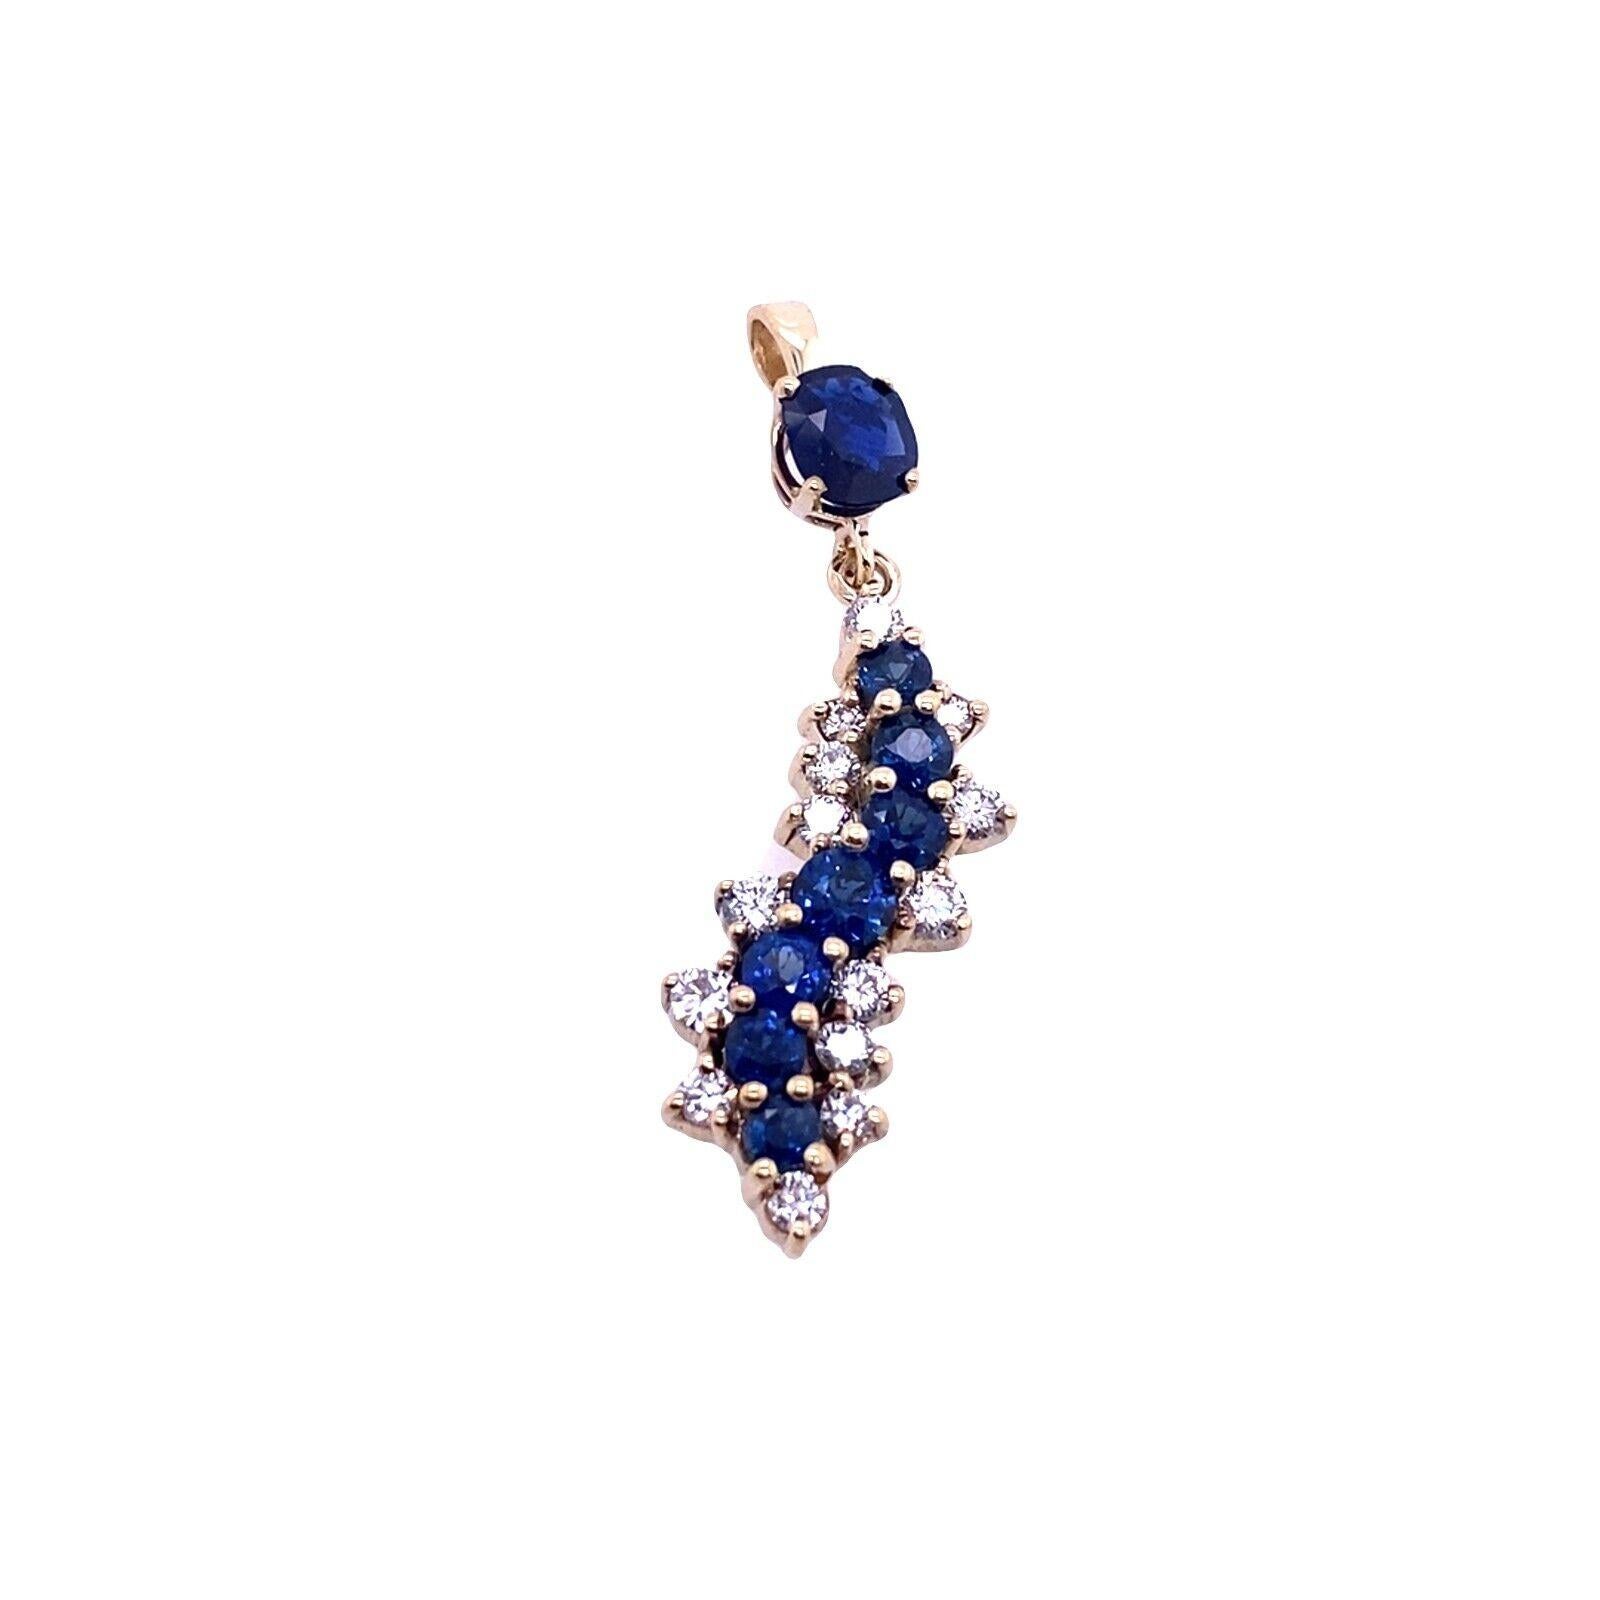 An elegant, unique, and timeless pendant set featuring a rich blue Sapphire and Diamonds in 9ct Yellow Gold. The pendant is suspended from a delicate 9ct Yellow Gold chain.

Additional Information: 
Total Diamond Weight: 0.50ct
Diamond Colour: